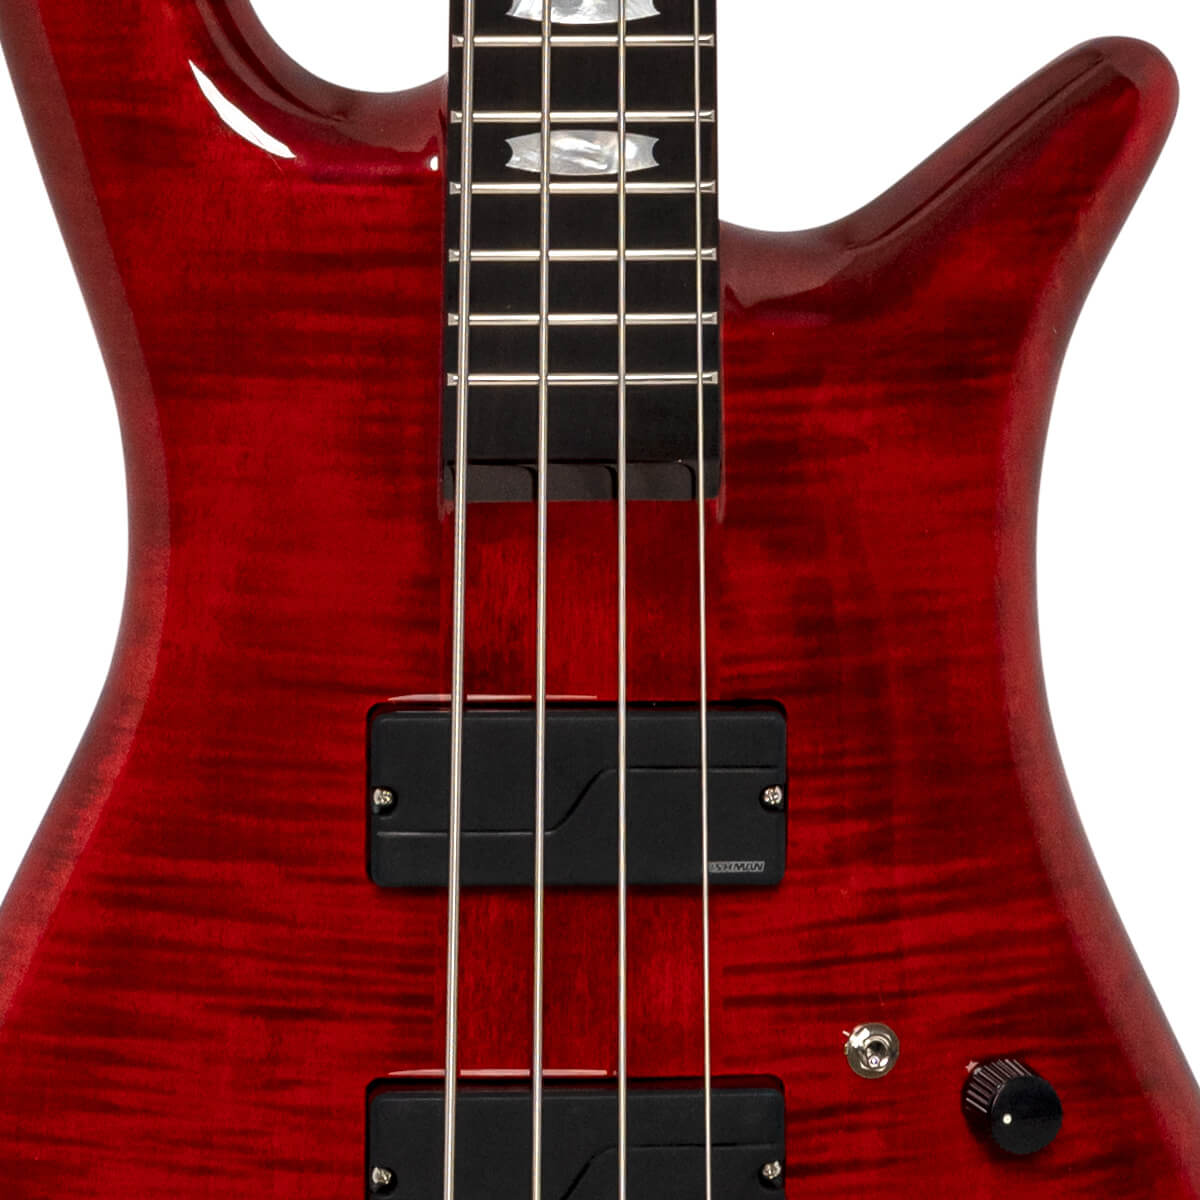 Spector Rudy Sarzo Lt4 Euro Signature Rw - Scarlett Red Gloss - Solid body electric bass - Variation 1